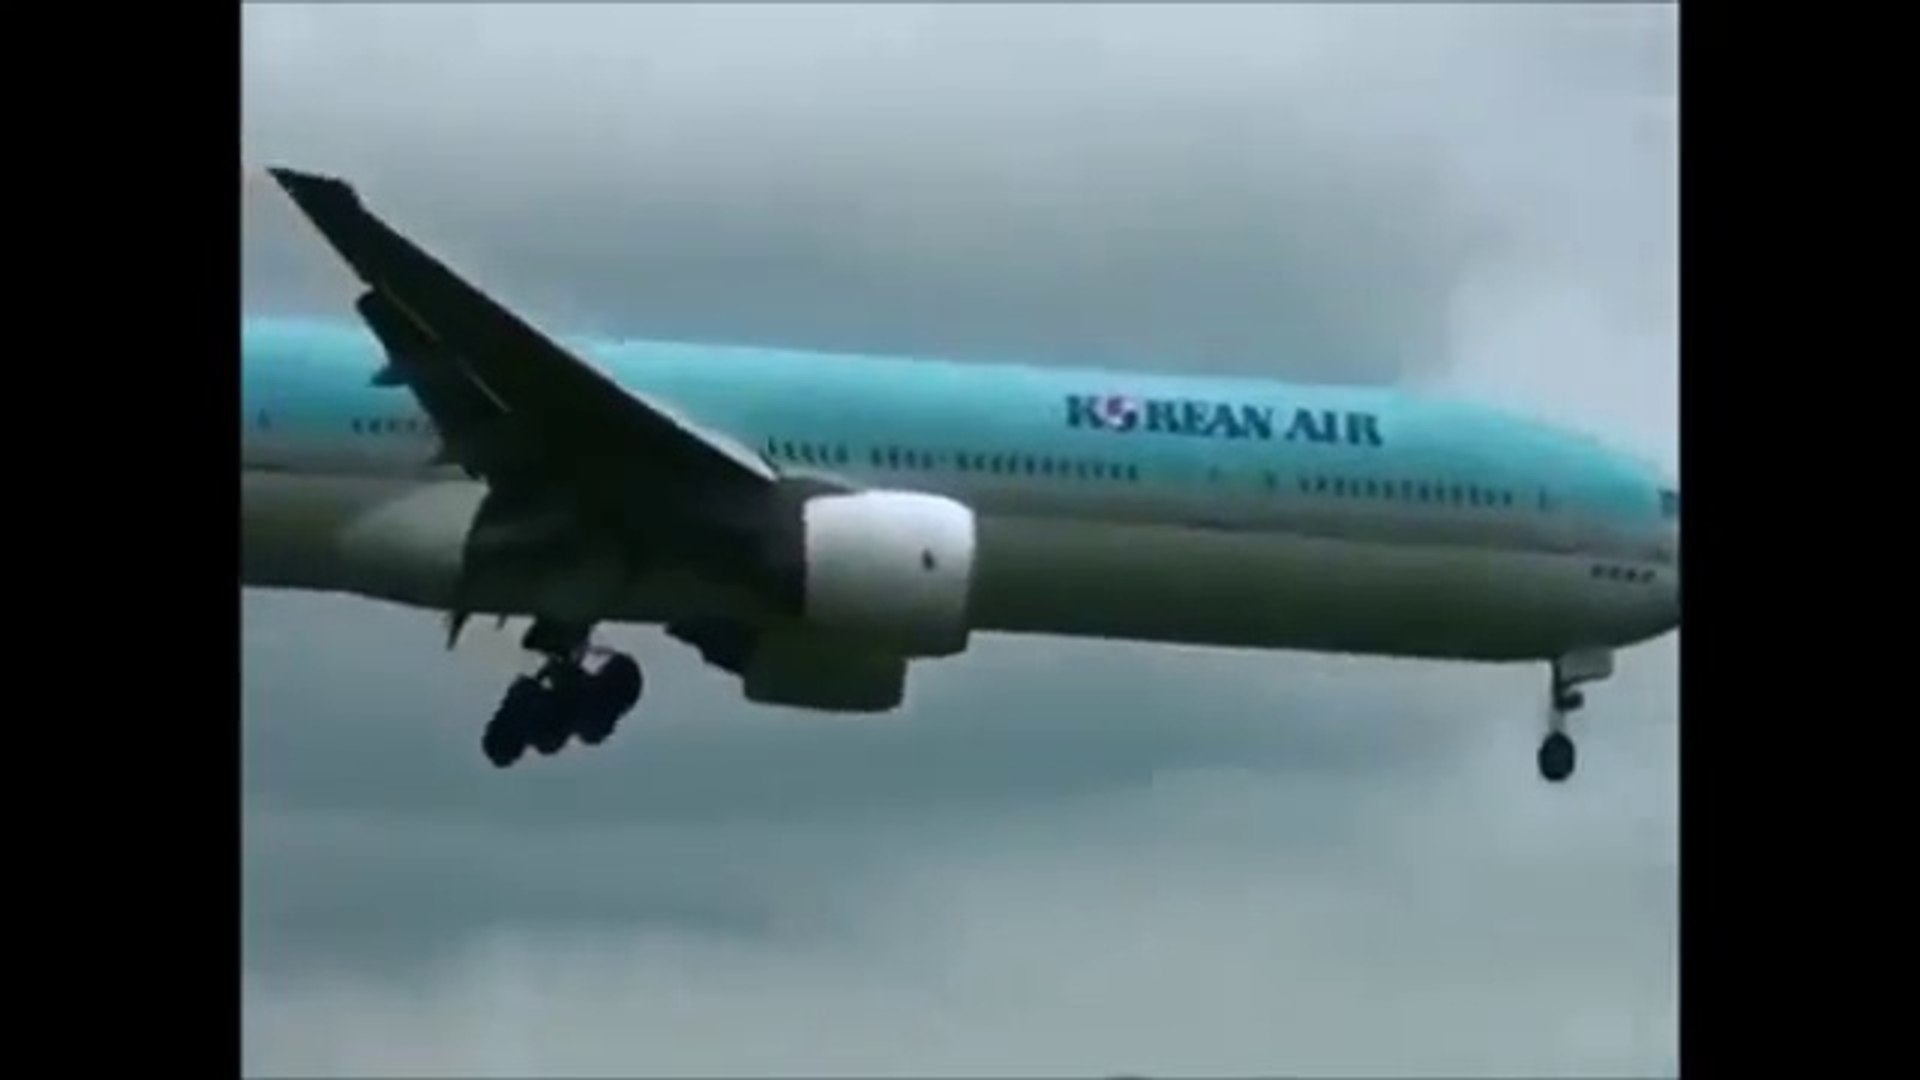 #1 AIRCRAFT NEAR MISS AND UNUSUAL EVENTS COMPILATION